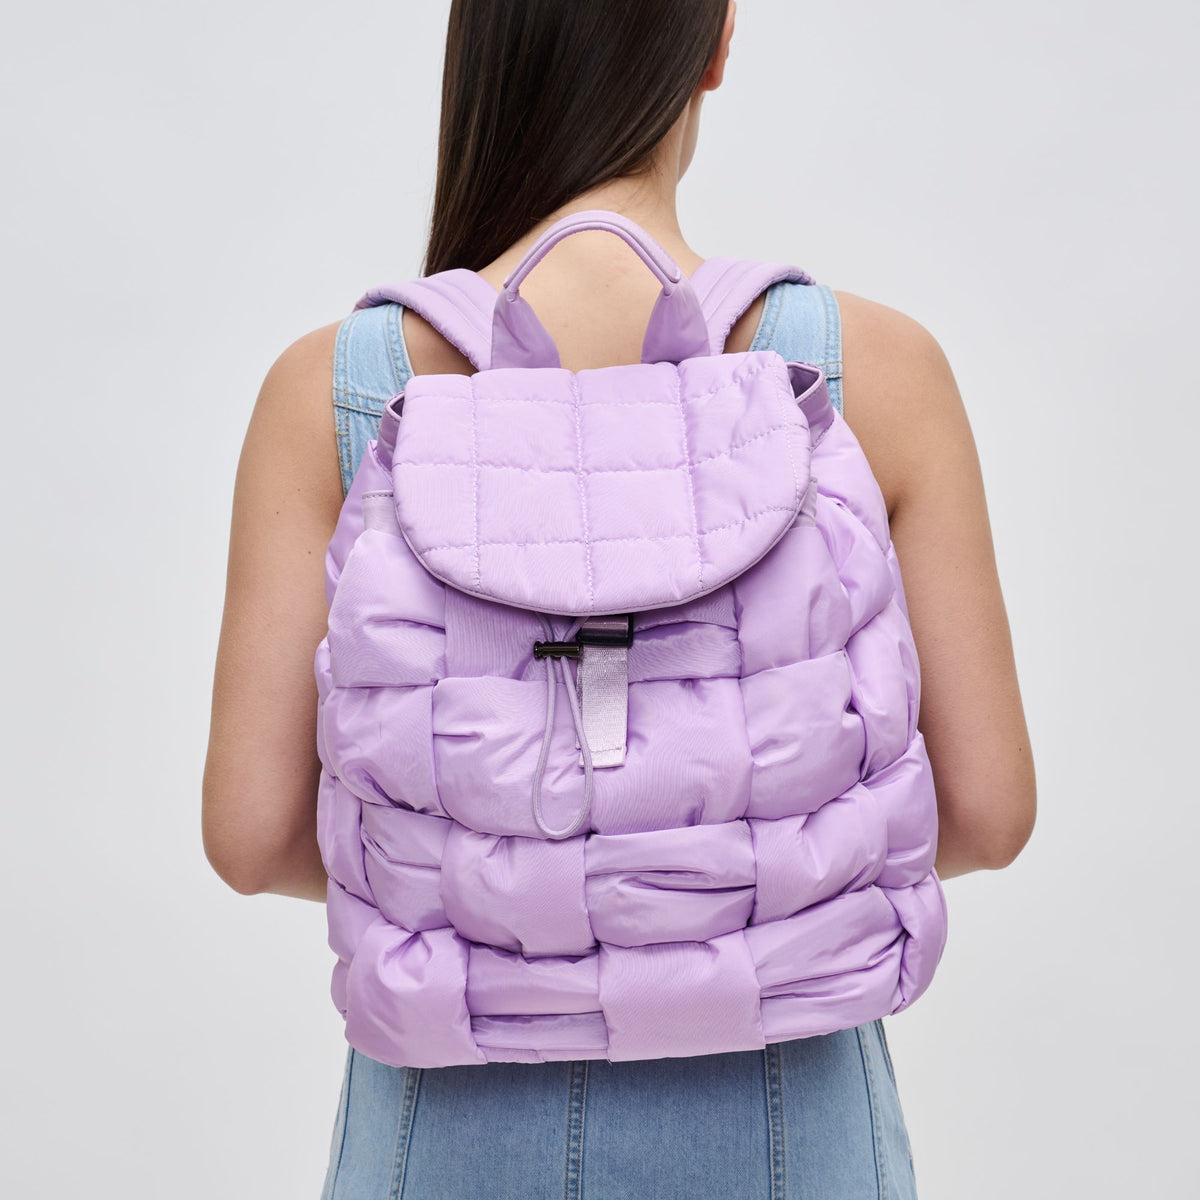 Woman wearing Lilac Sol and Selene Perception Backpack 841764107969 View 1 | Lilac